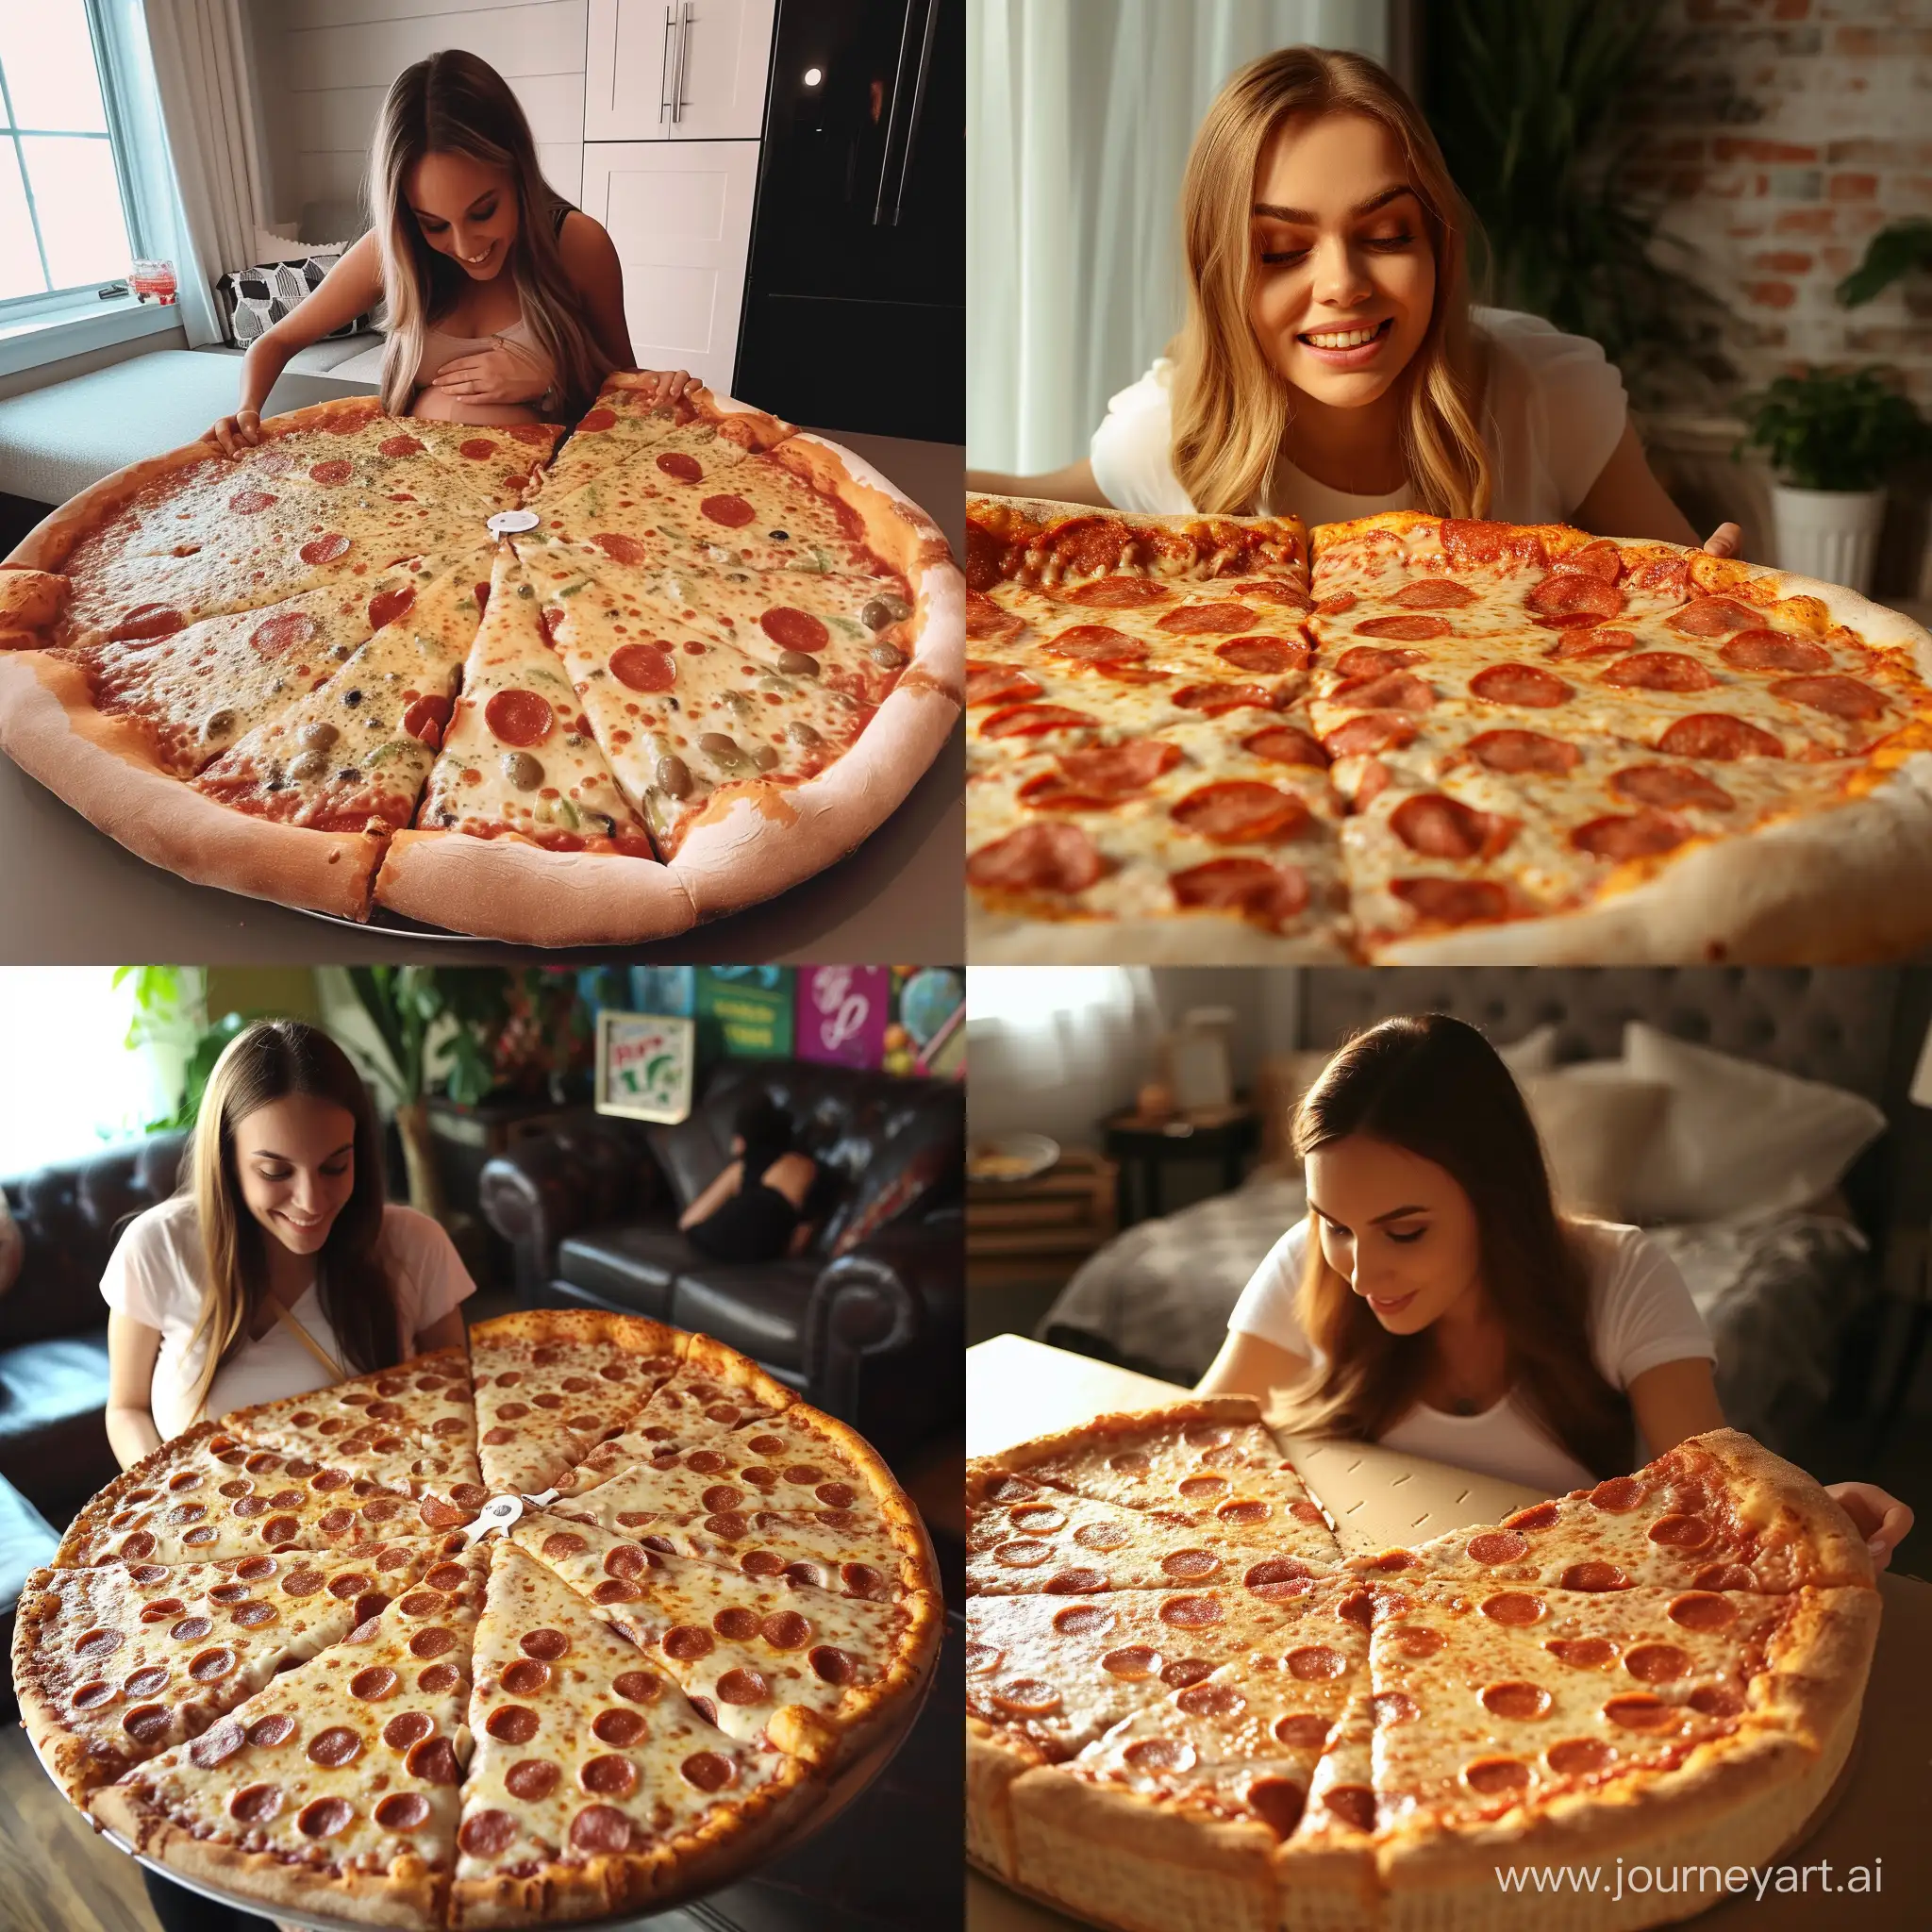 Expectant-Mother-Indulging-in-Oversized-Pizza-Delight